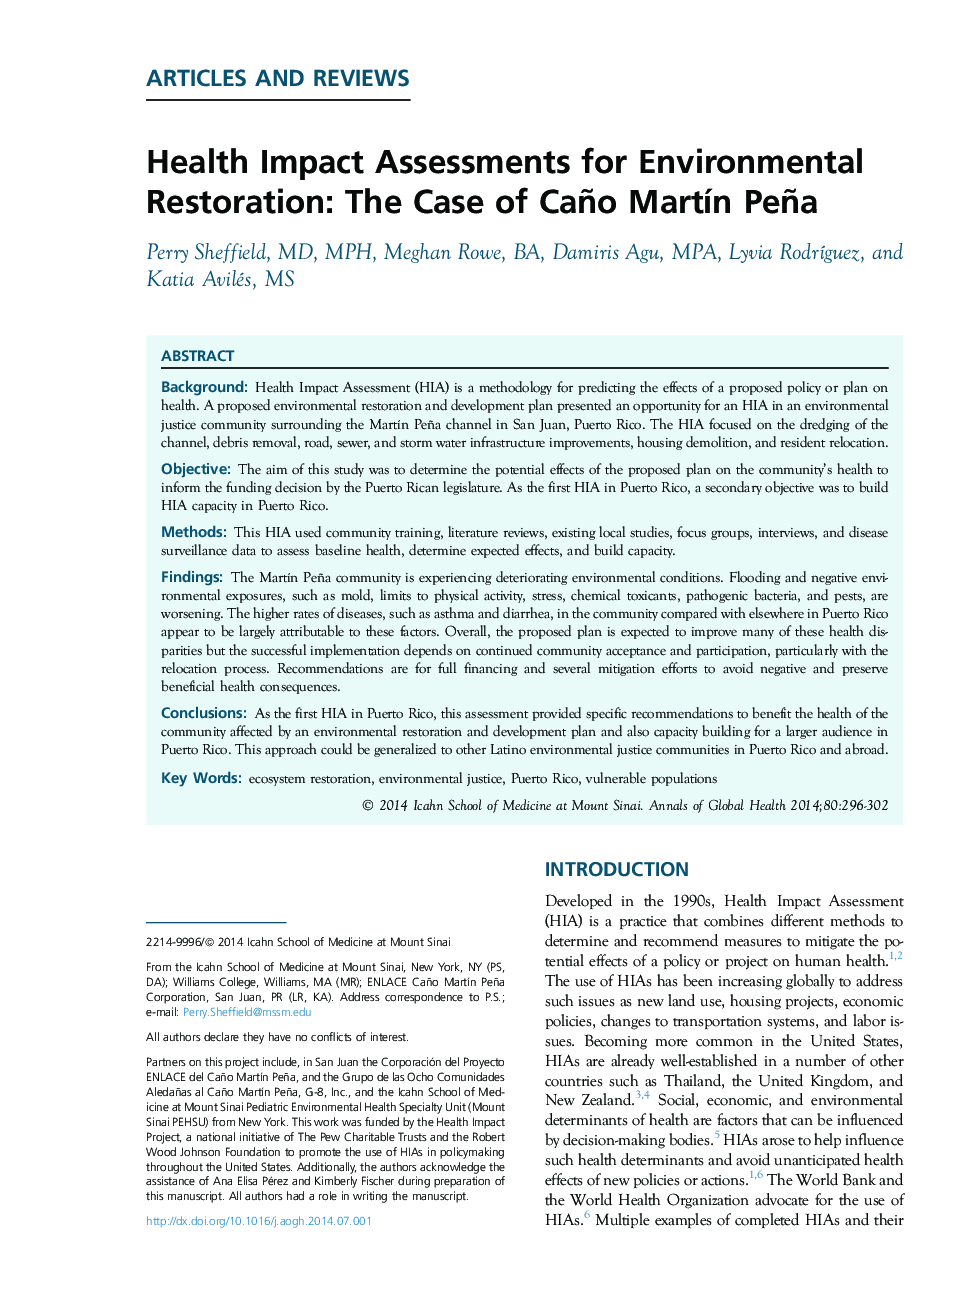 Health Impact Assessments for Environmental Restoration: The Case of Caño Martín Peña 